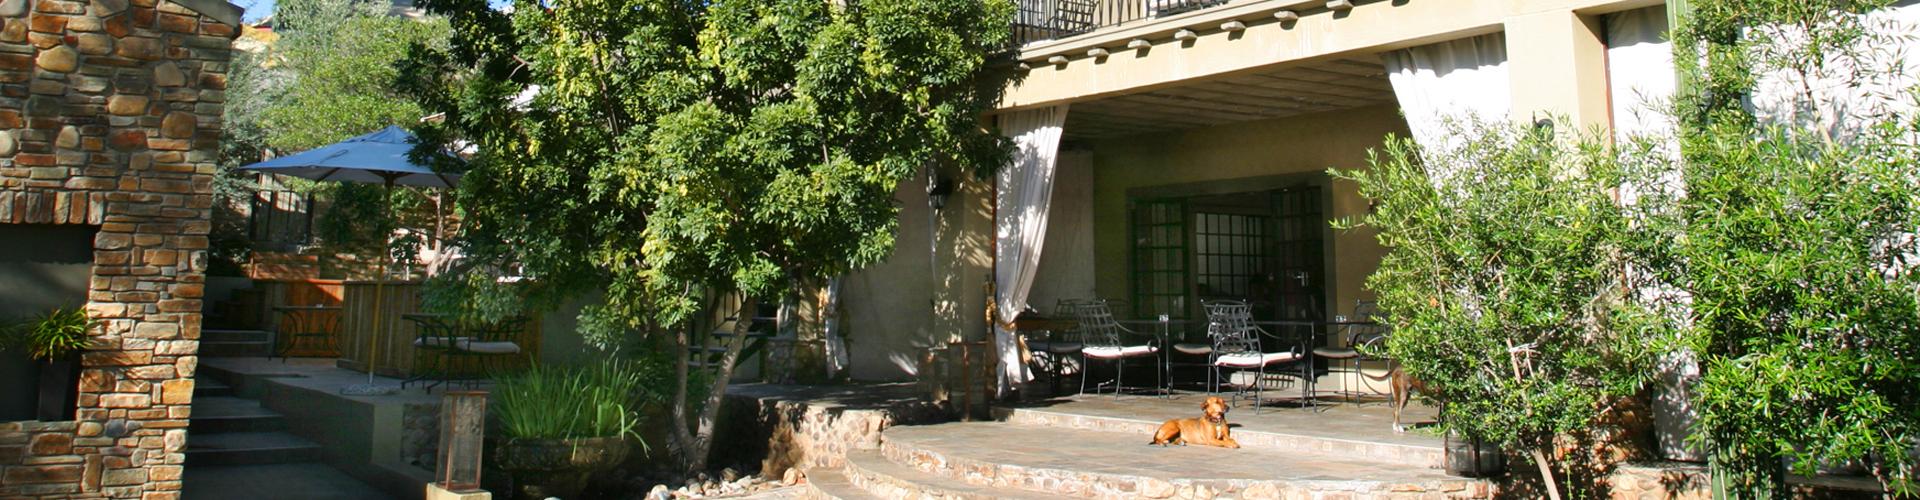 olive-grove-guesthouse-namibie-header